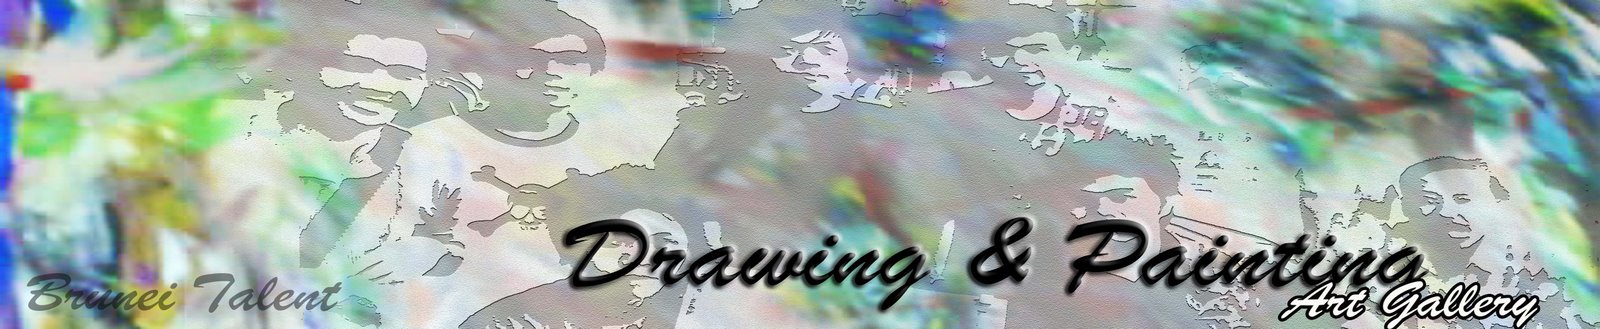 Drawing & Painting Art Gallery